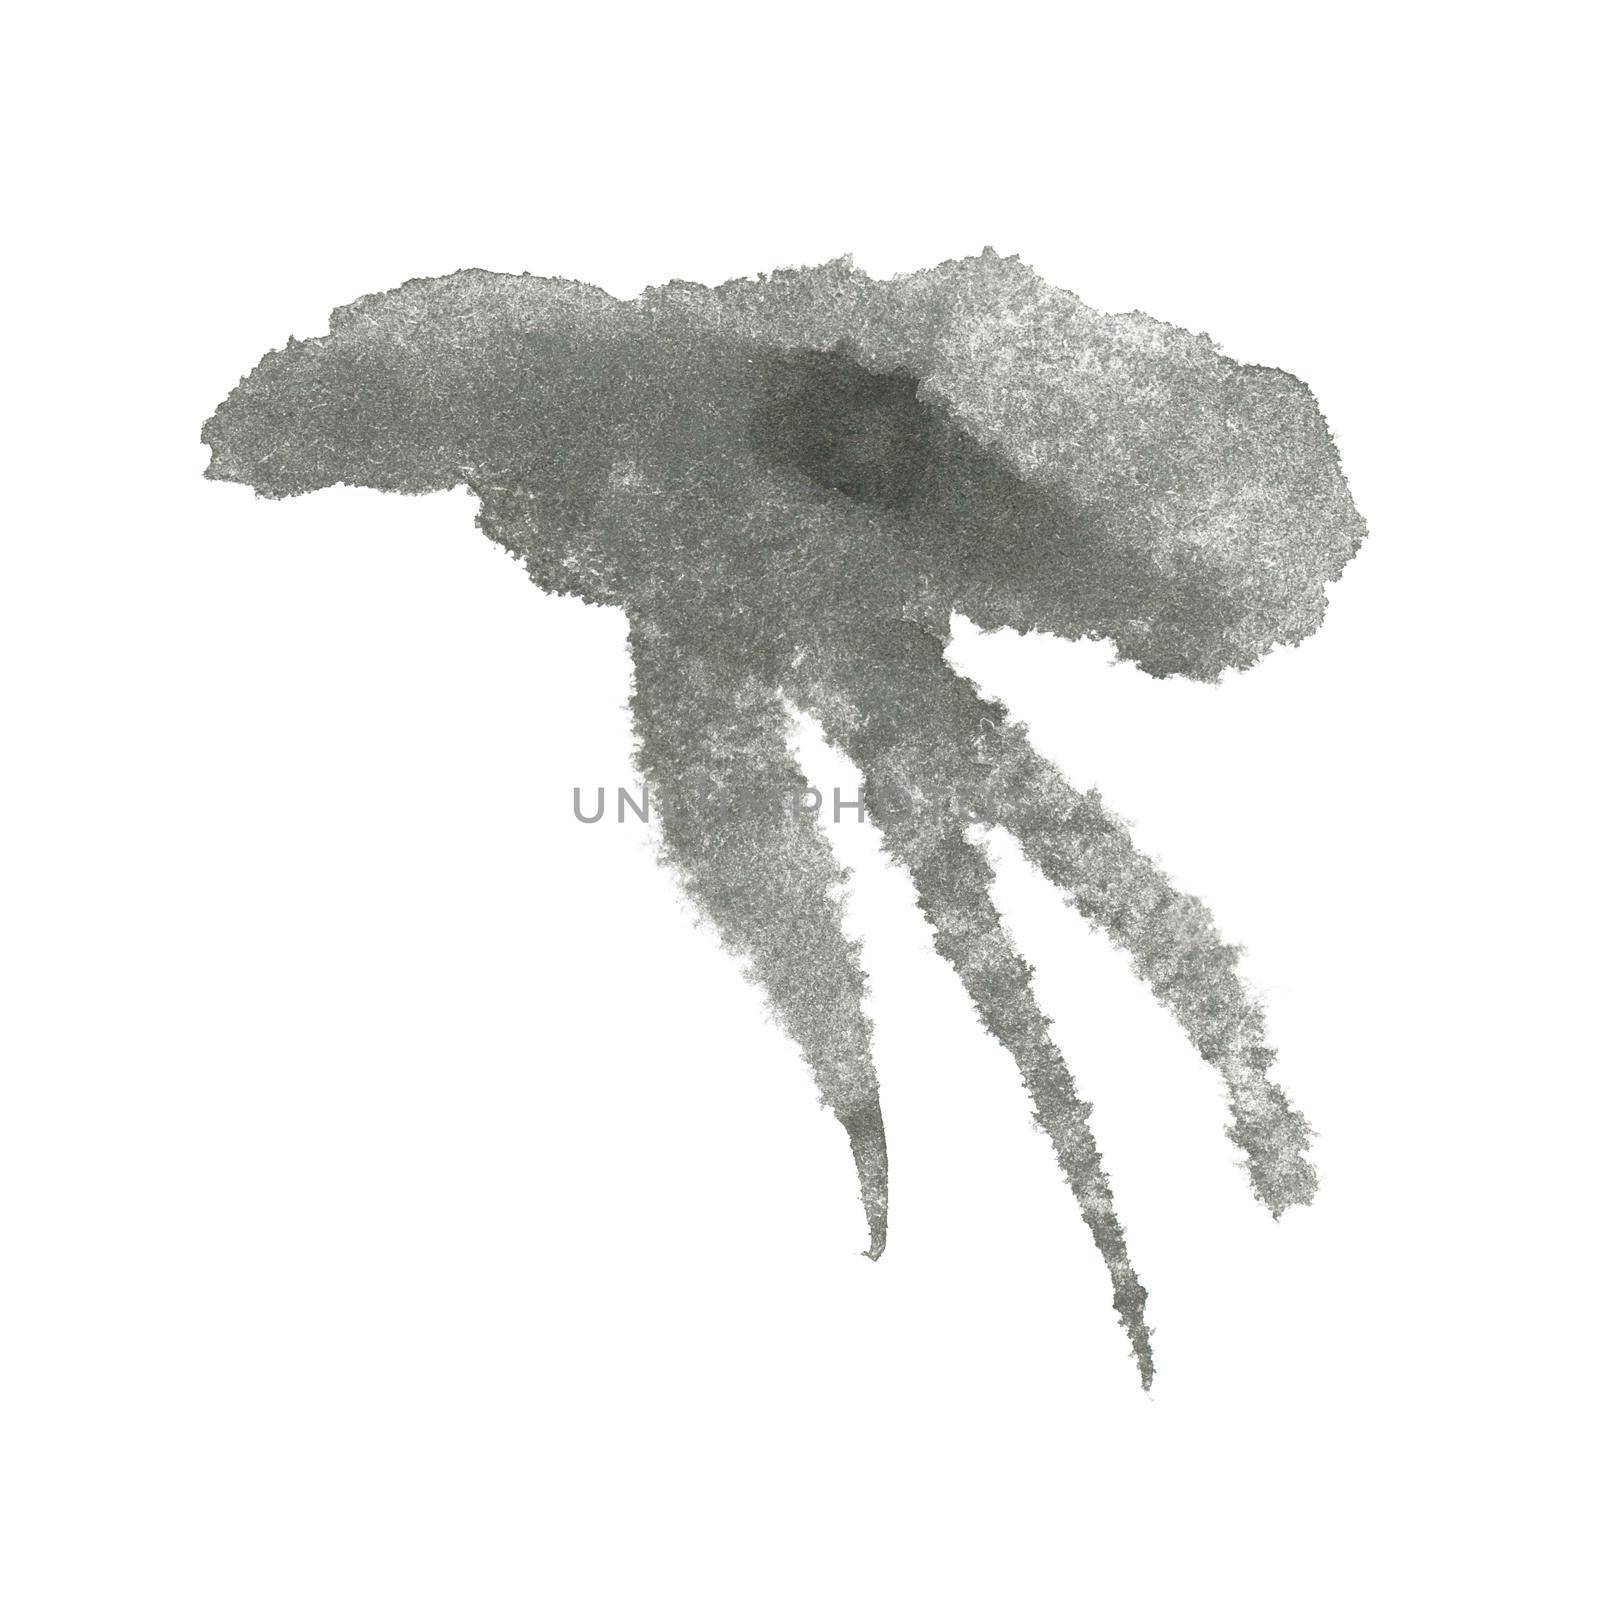 Black Hand drawn Abstract Watercolor Stain Isolated on White Background. Watercolour Spot for Decoration, Poster, Banner, Greeting Cards Design.